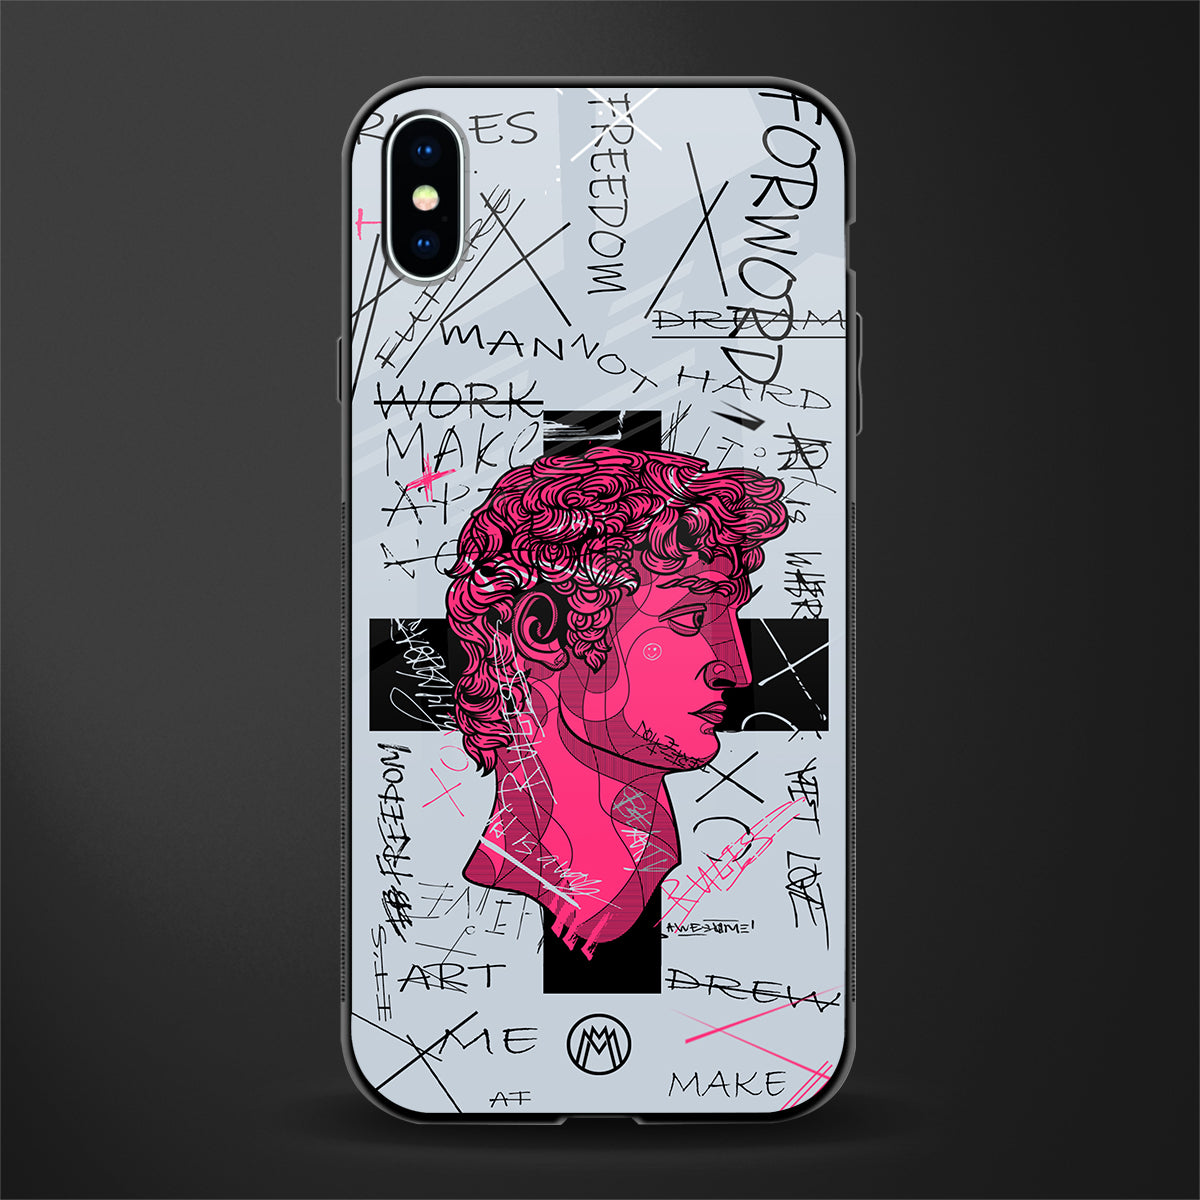 lost in reality david glass case for iphone xs max image